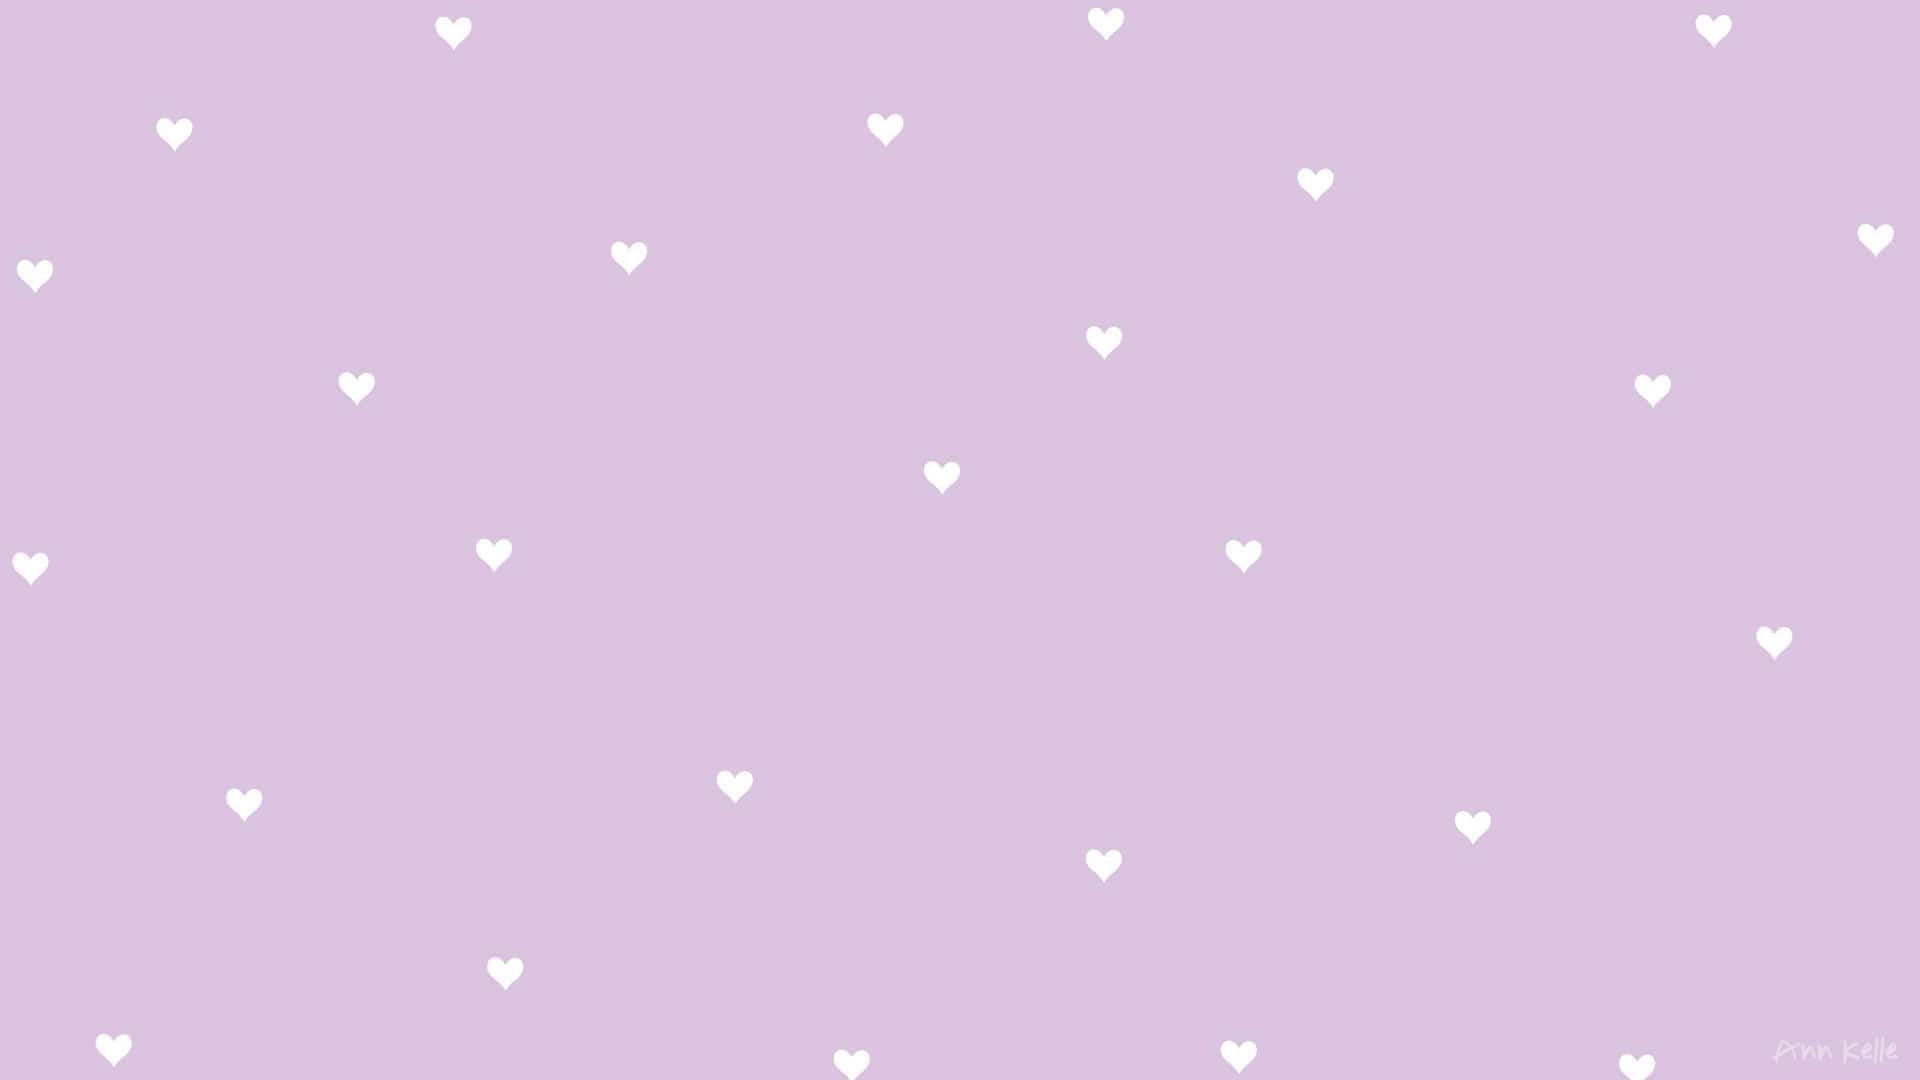 Explore a Lavender Aesthetic with this Laptop Wallpaper